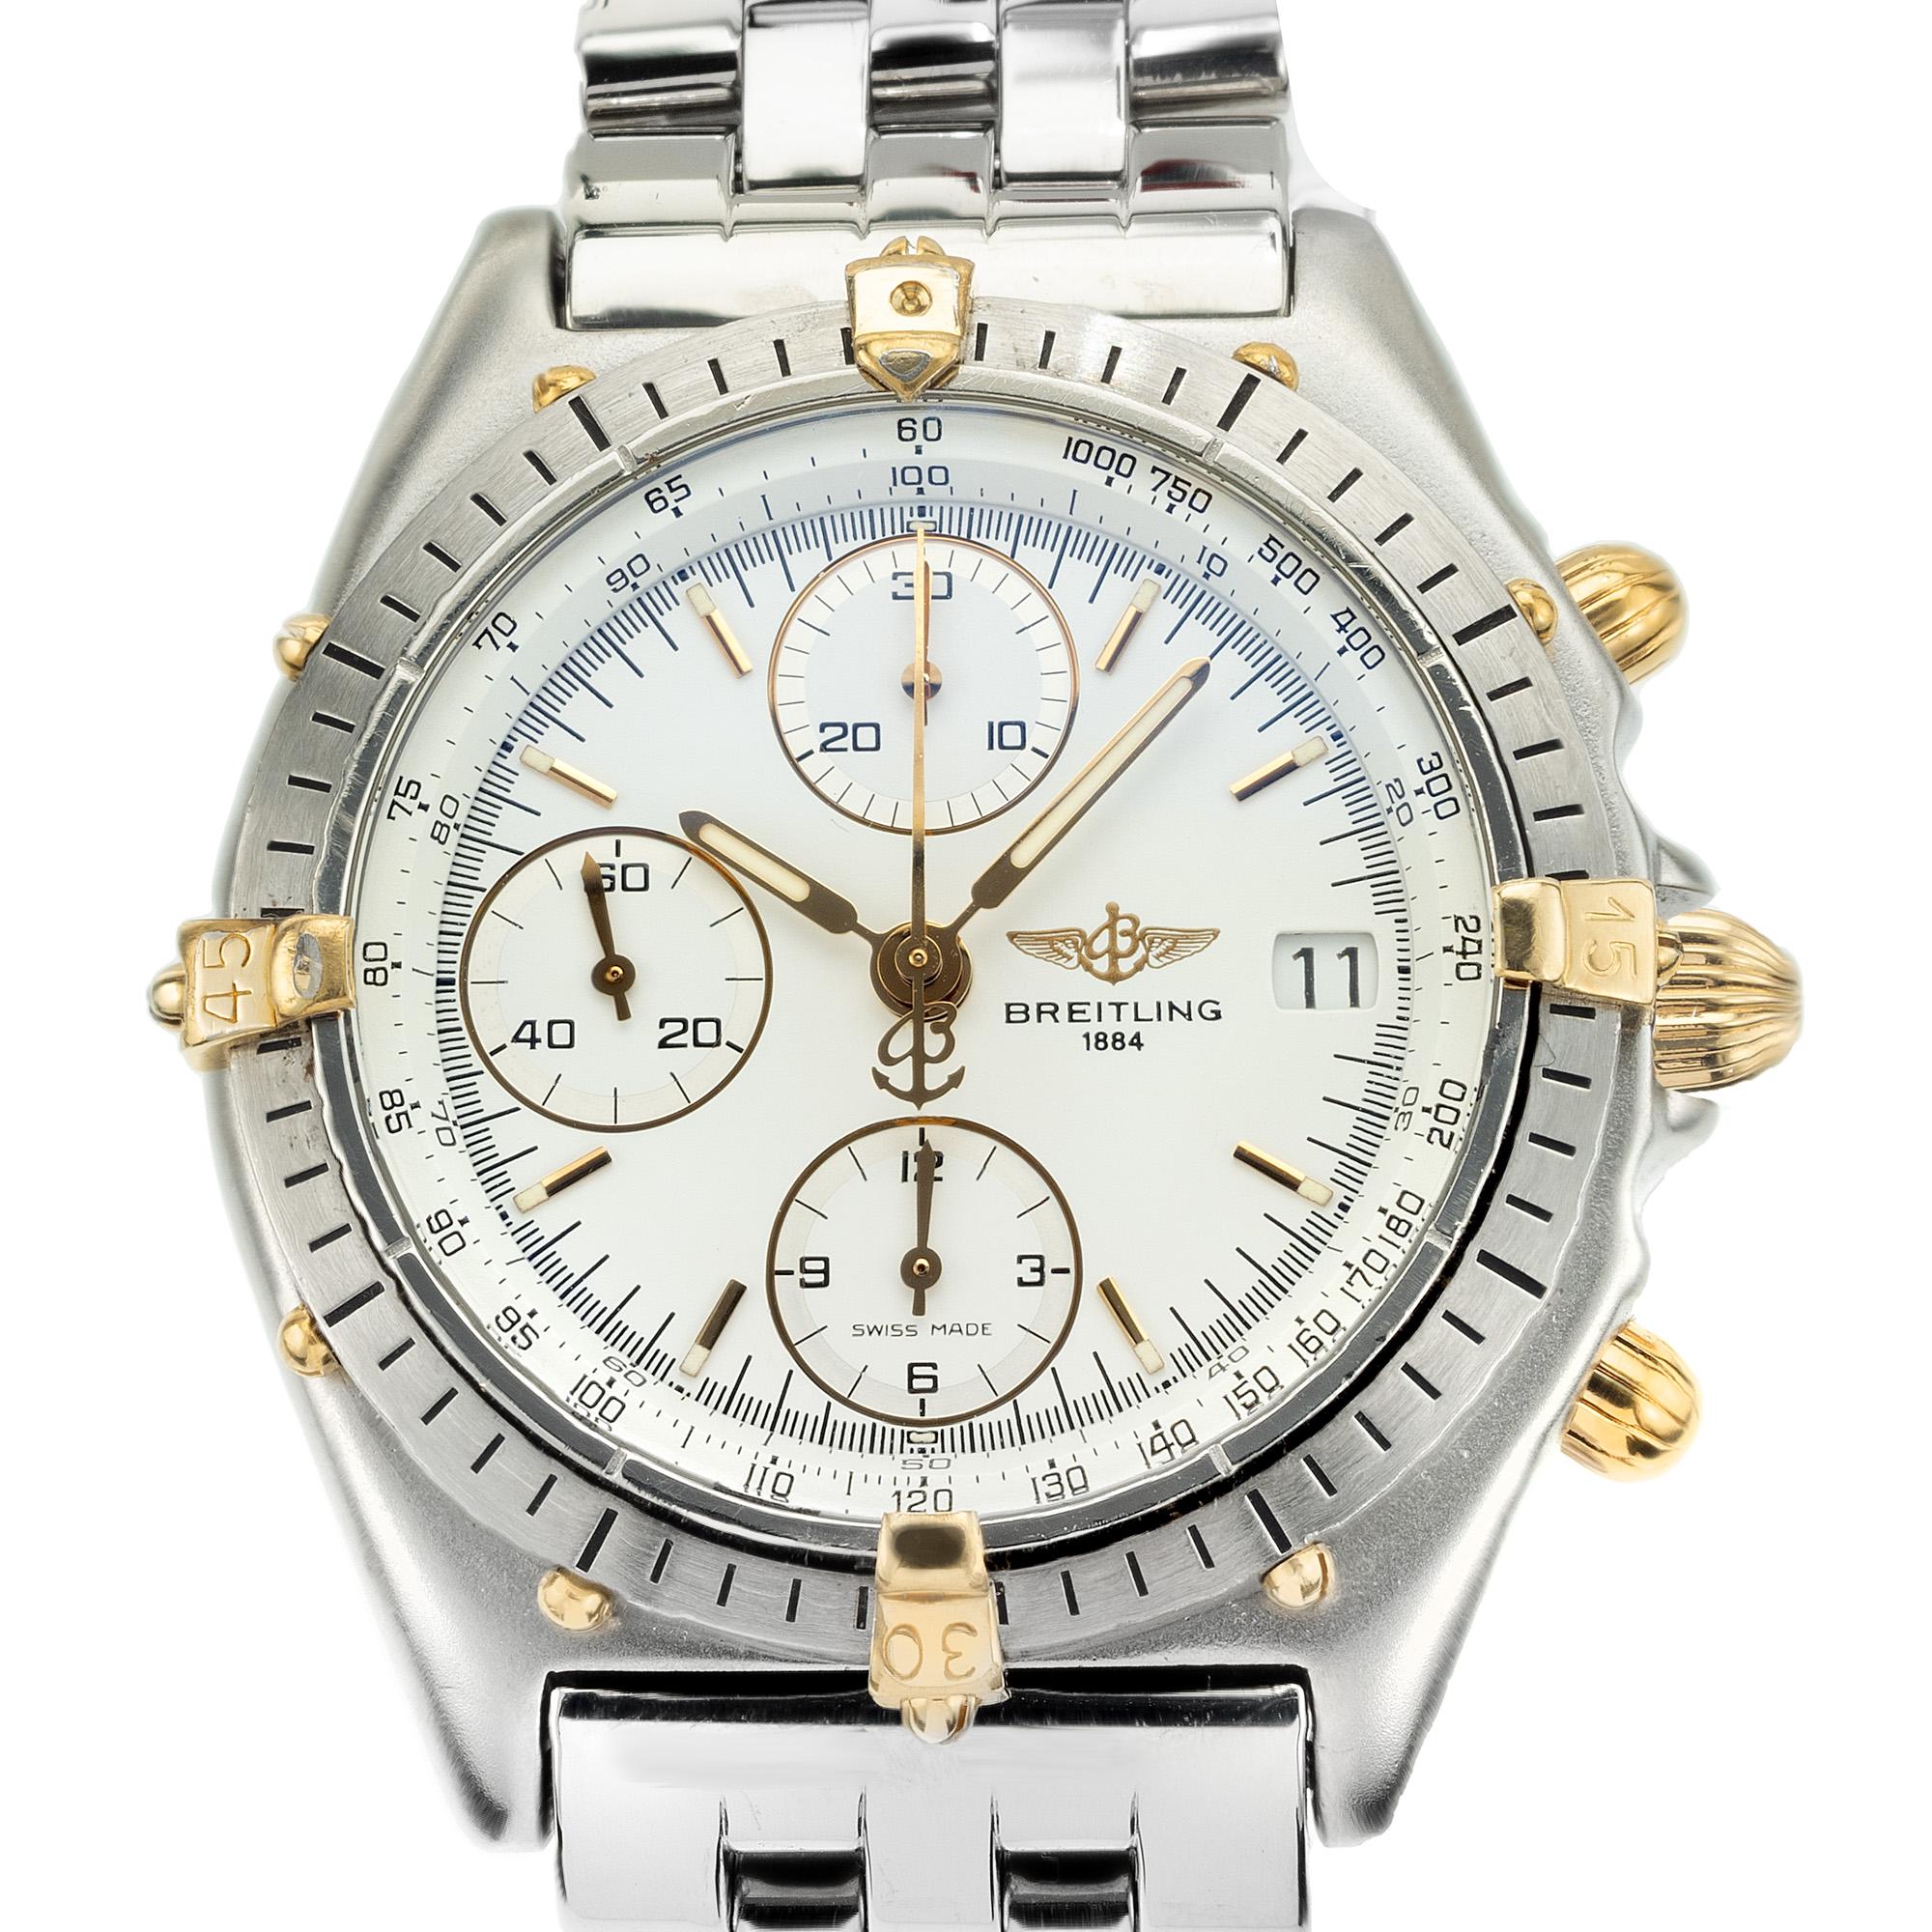 1990's Breitling chronograph with crisp white round dial. 1990's Breitling 18k yellow gold and steel chronograph wristwatch is a true masterpiece in the world of luxury timepieces. This exquisite watch is a harmonious blend of white gold and steel.